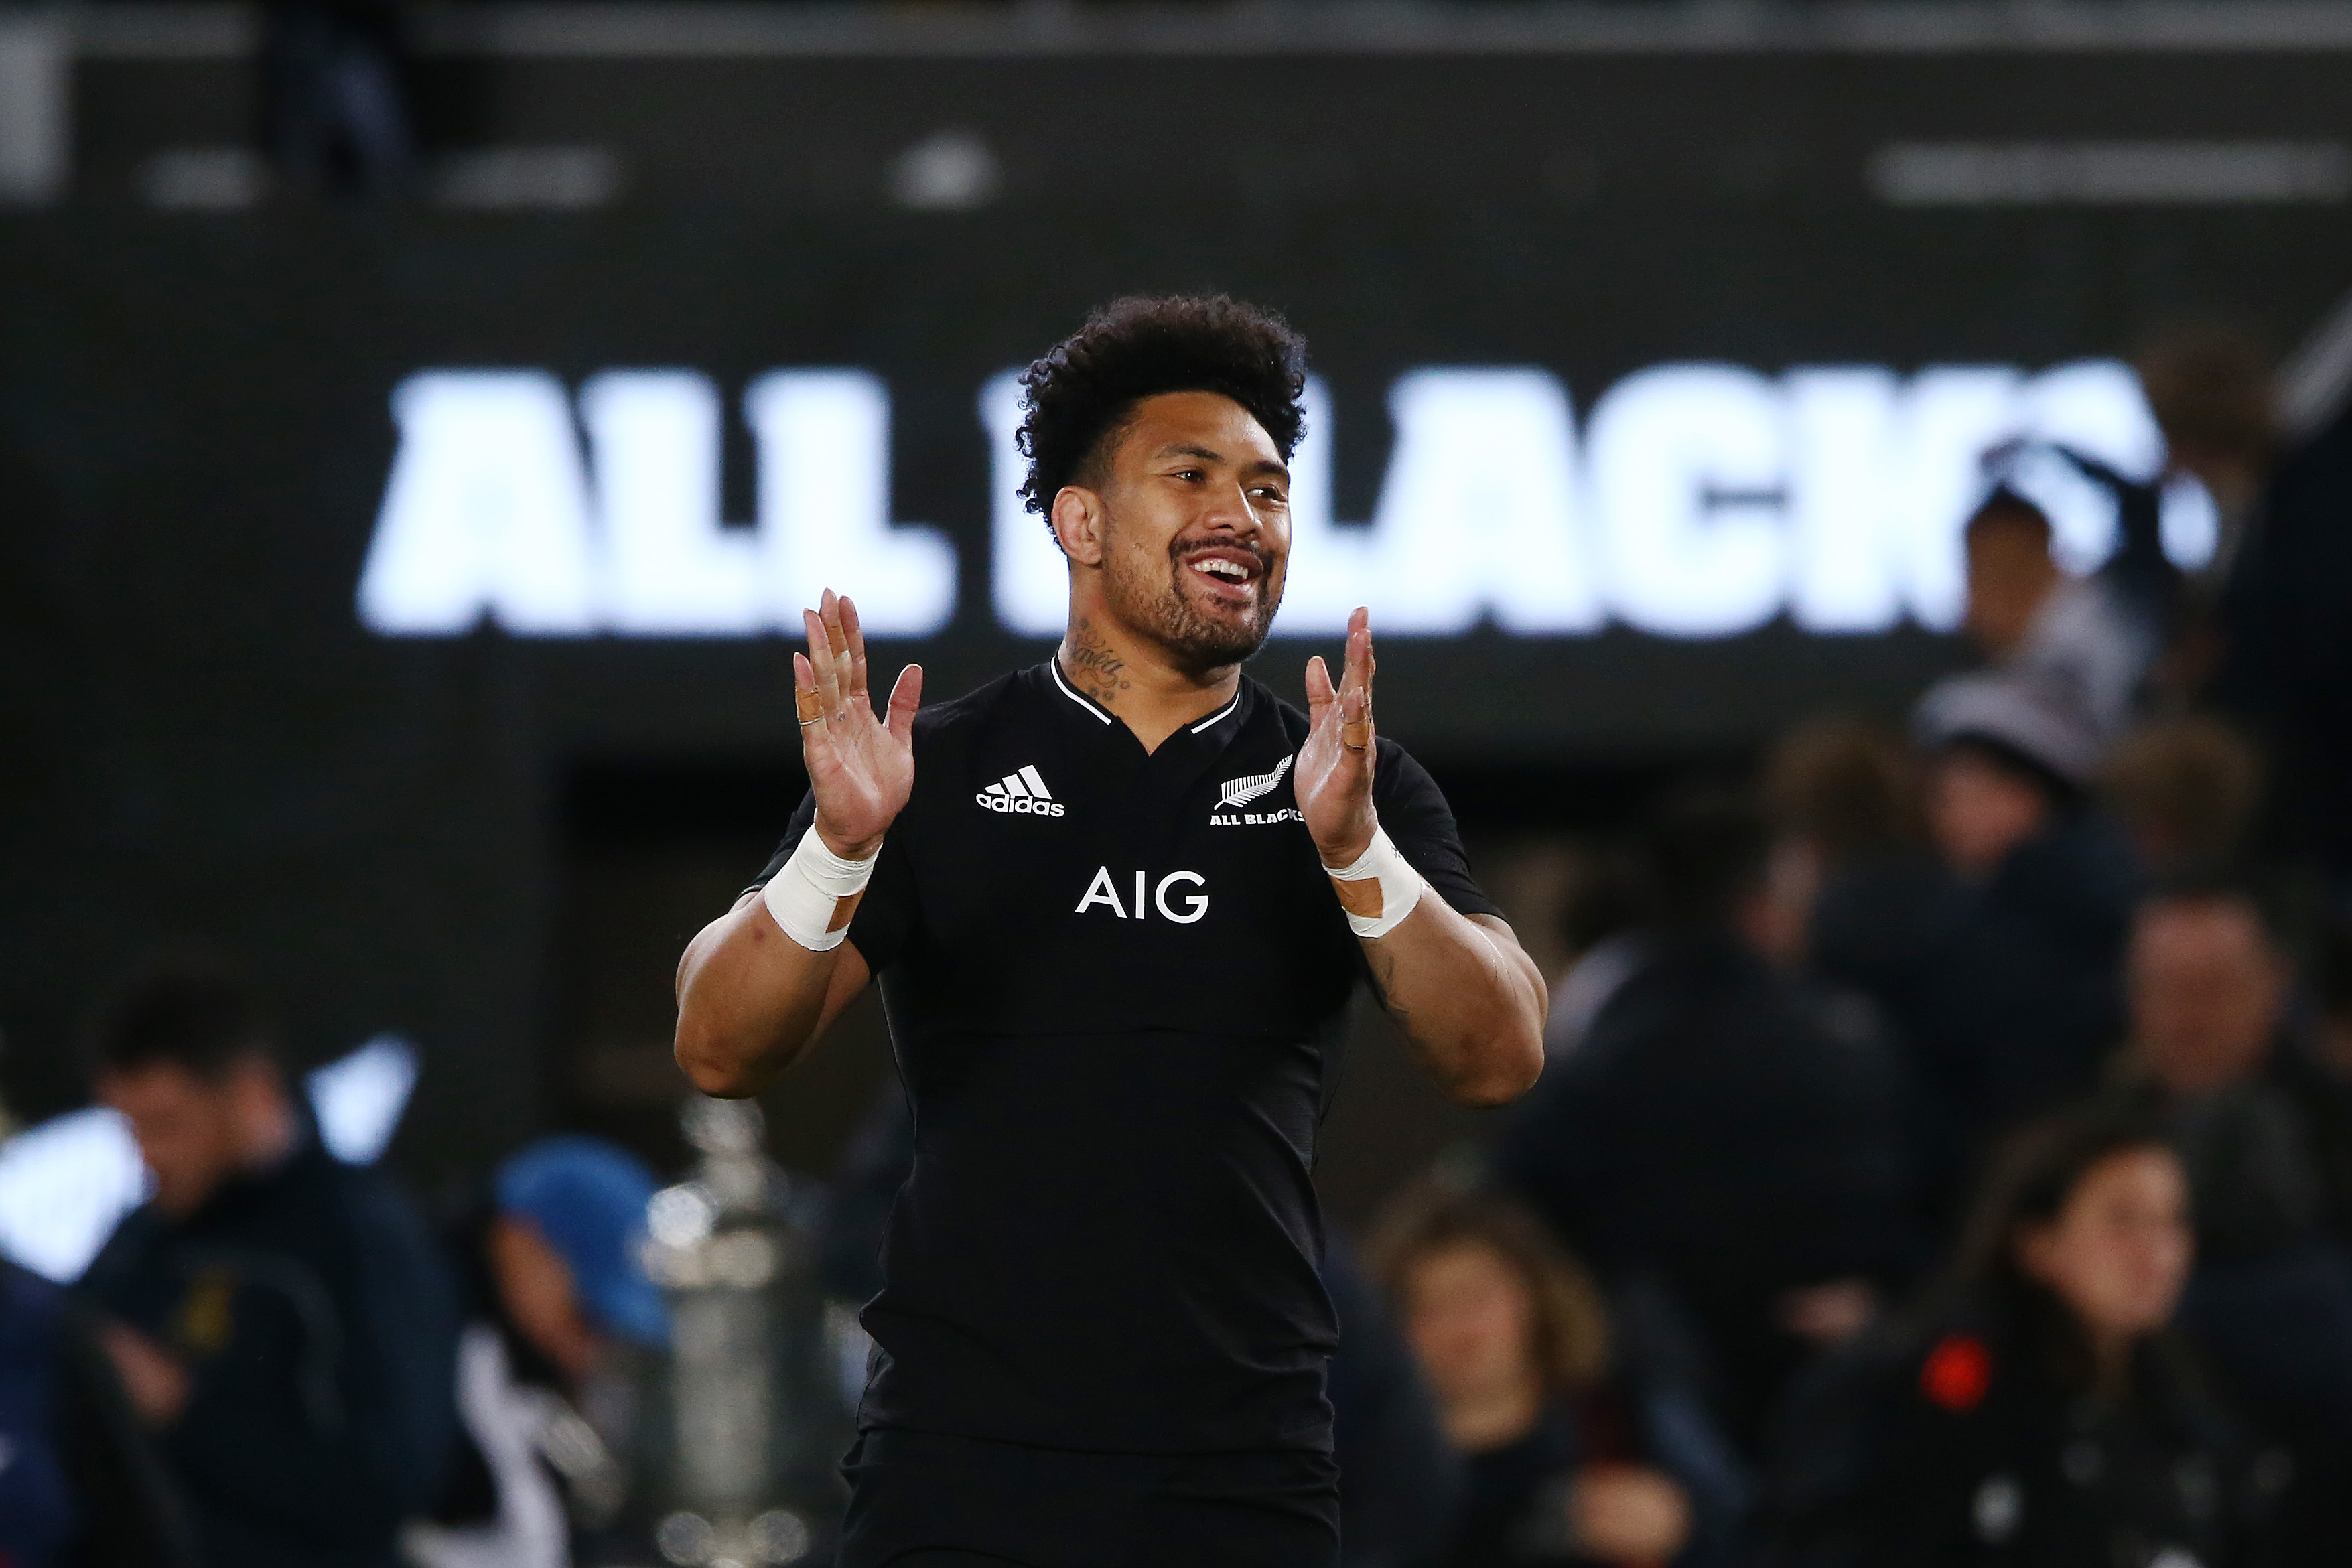 Ardie Savea recommits to New Zealand Rugby and the Hurricanes